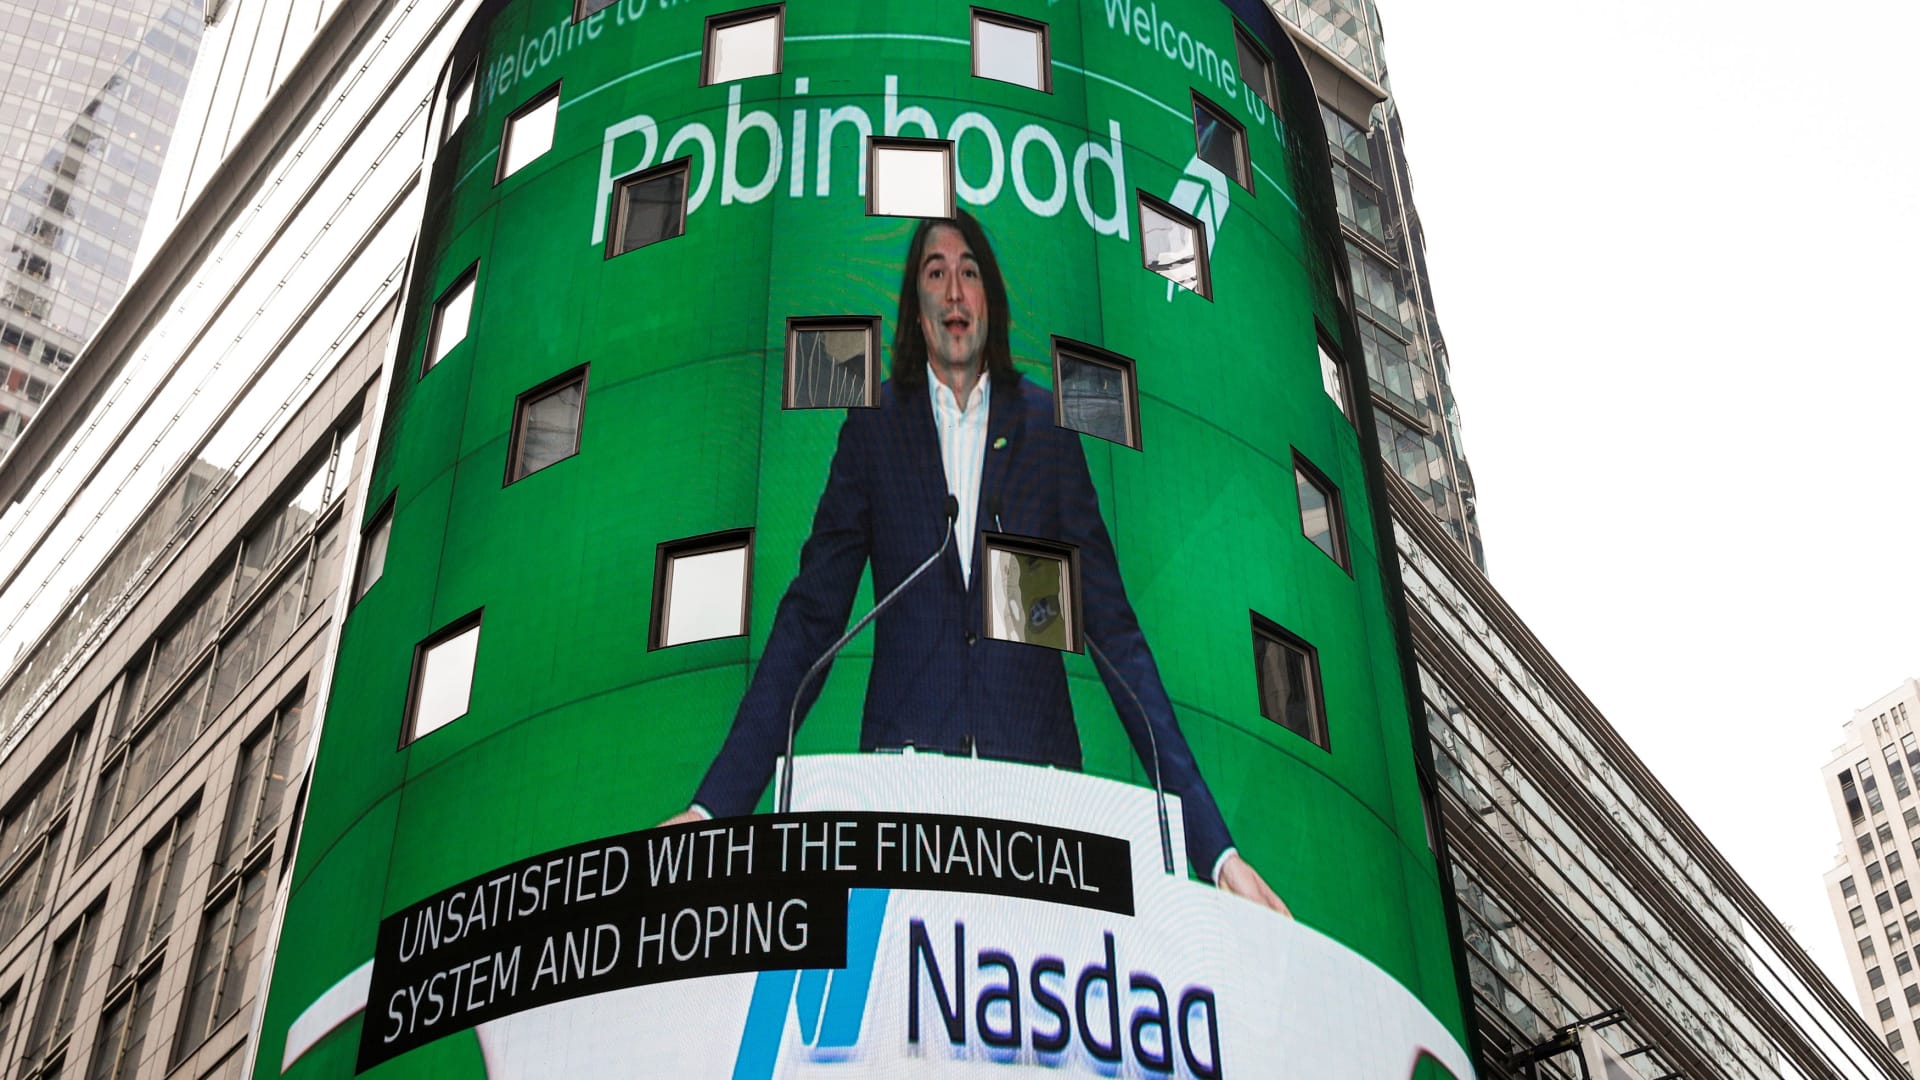 Robinhood shares jump after crypto CEO Sam Bankman-Fried acquires stake